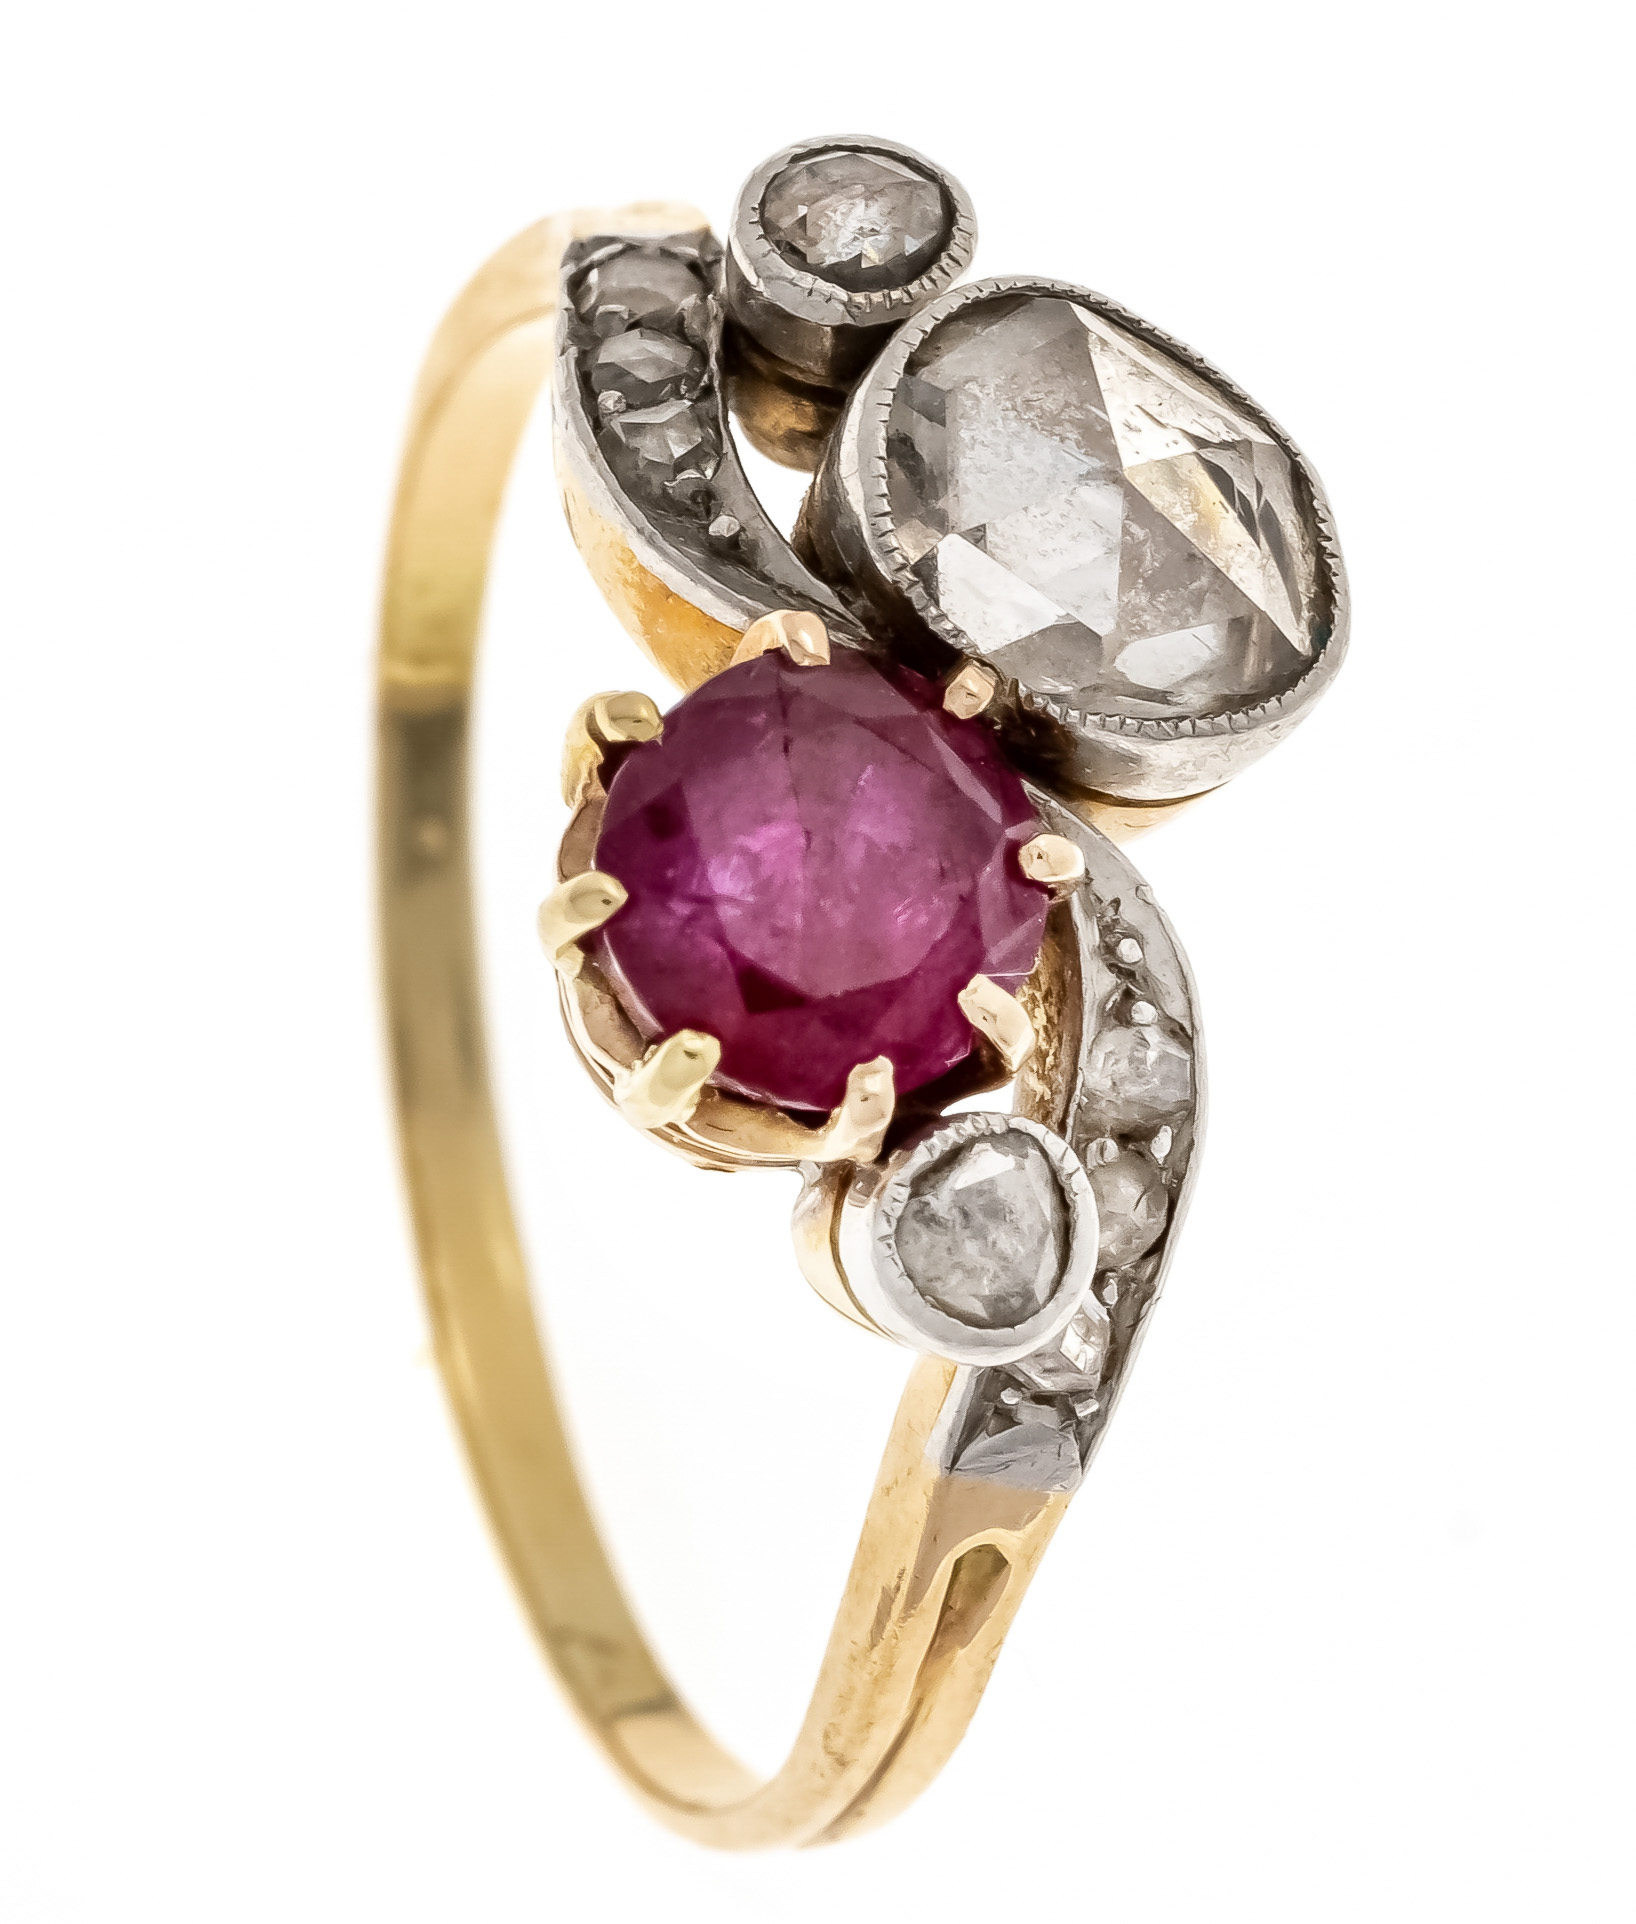 Toi-et-Moi ruby diamond ring circa 1910 GG/WG 750/000 unstamped, tested, with a natural round